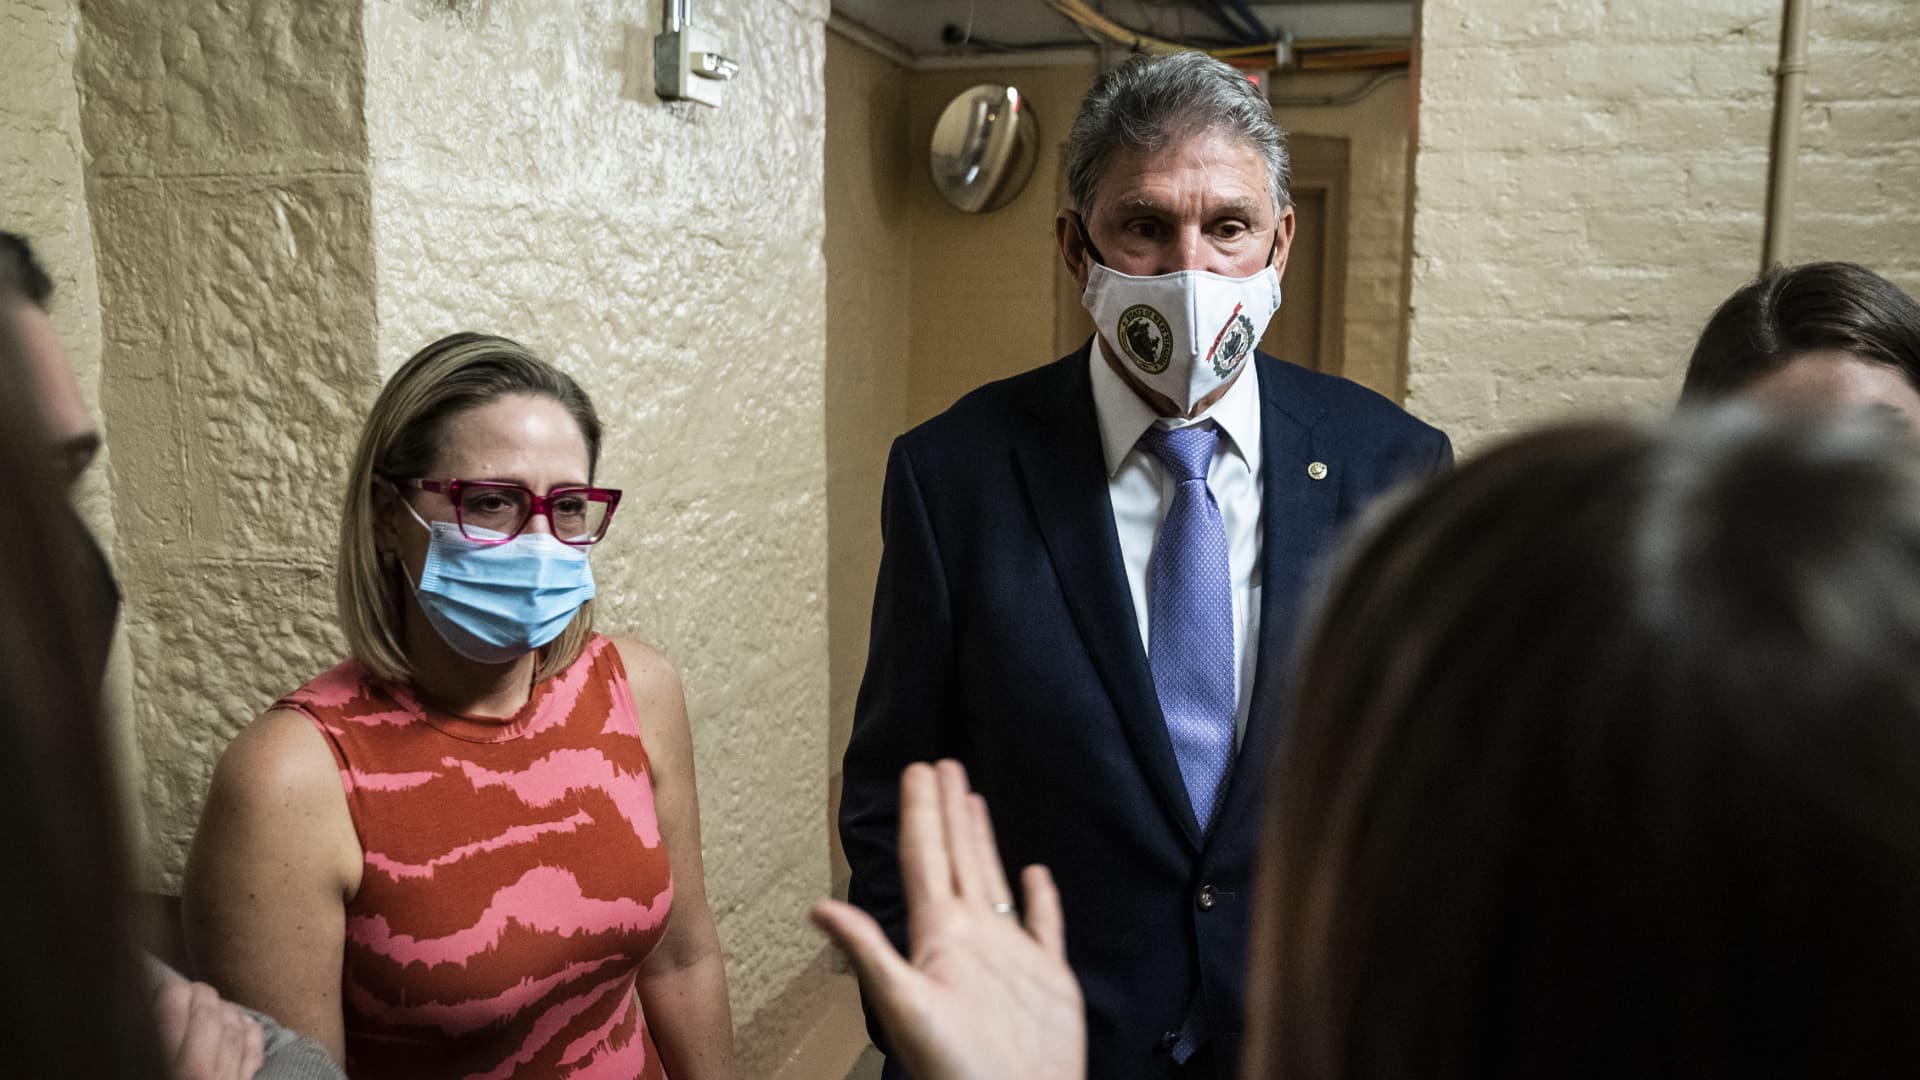 Sen. Kyrsten Sinema, D-Ariz., and Sen. Joe Manchin, D-W.Va., speak to a reporter after a private meeting between the two of them before a vote on Capitol Hill on Thursday, Sept. 30, 2021 in Washington, DC.